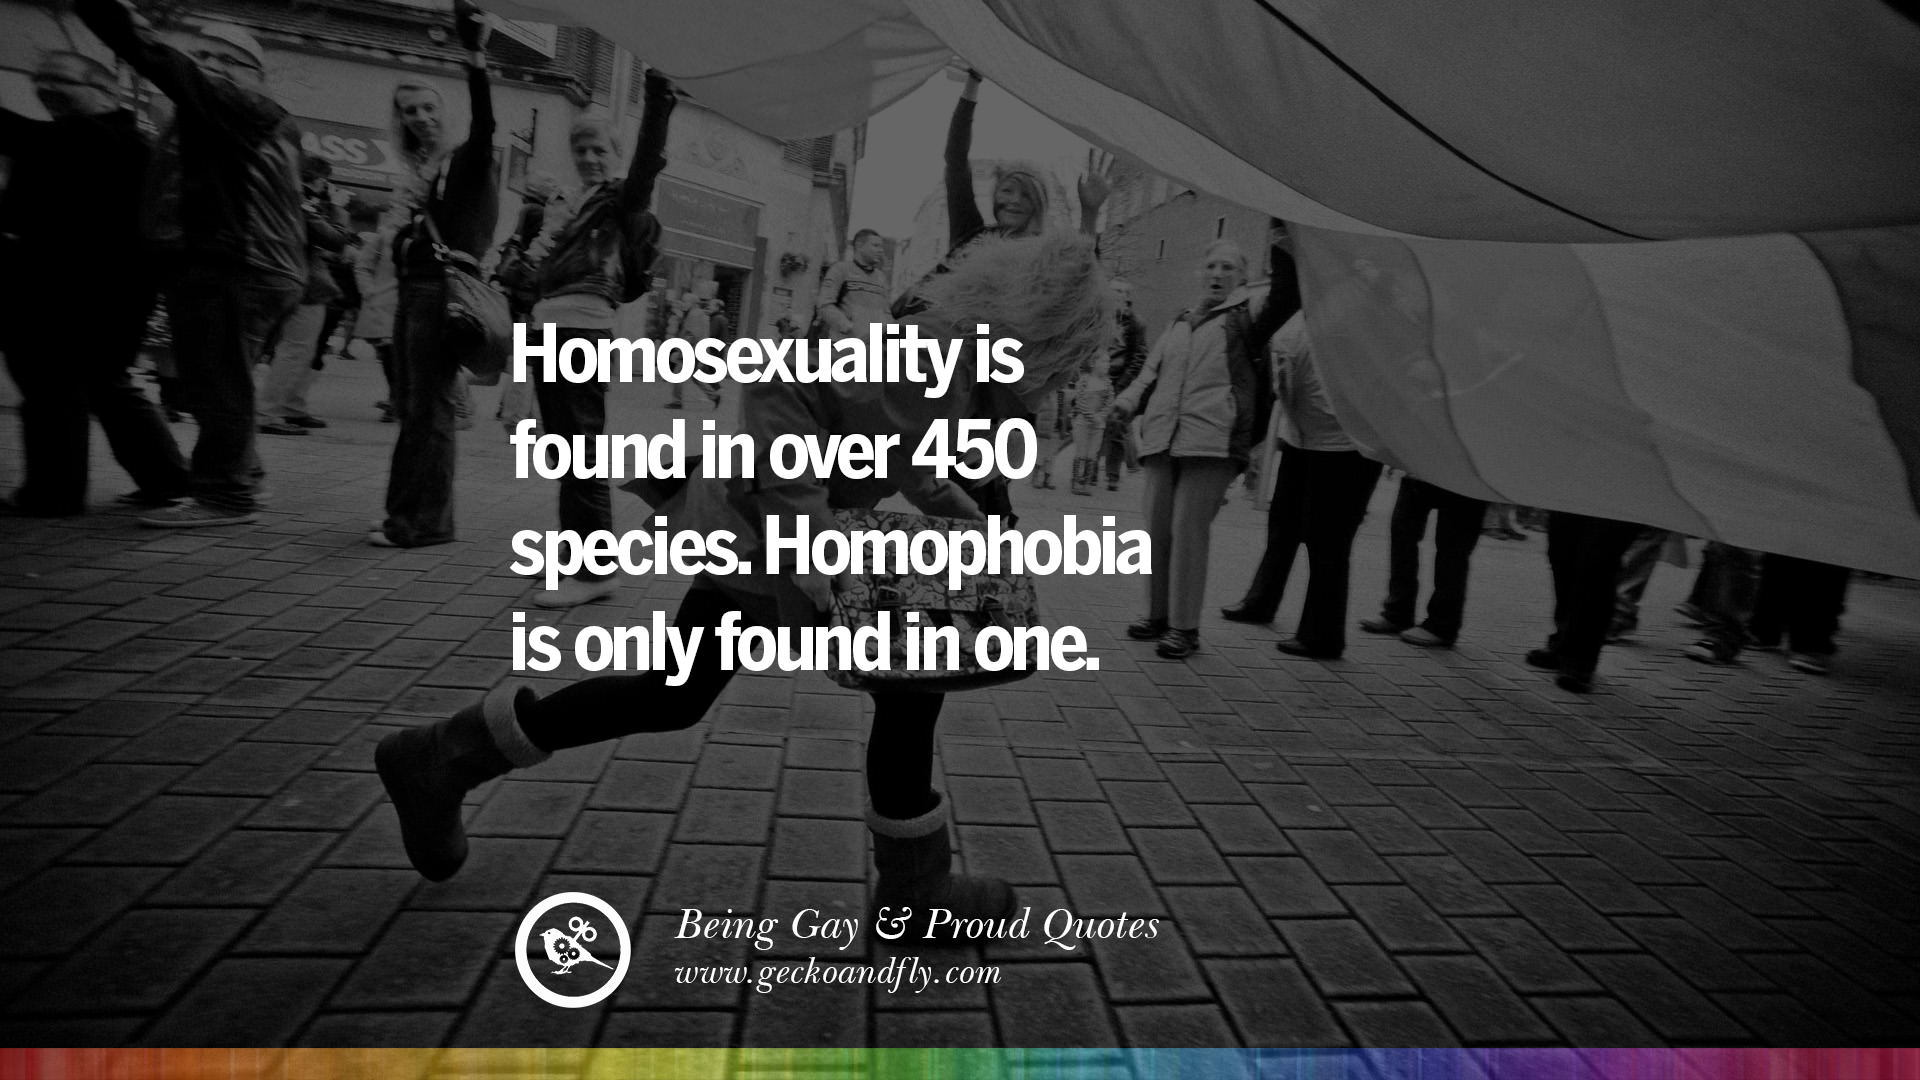 gay pride quotes christianity